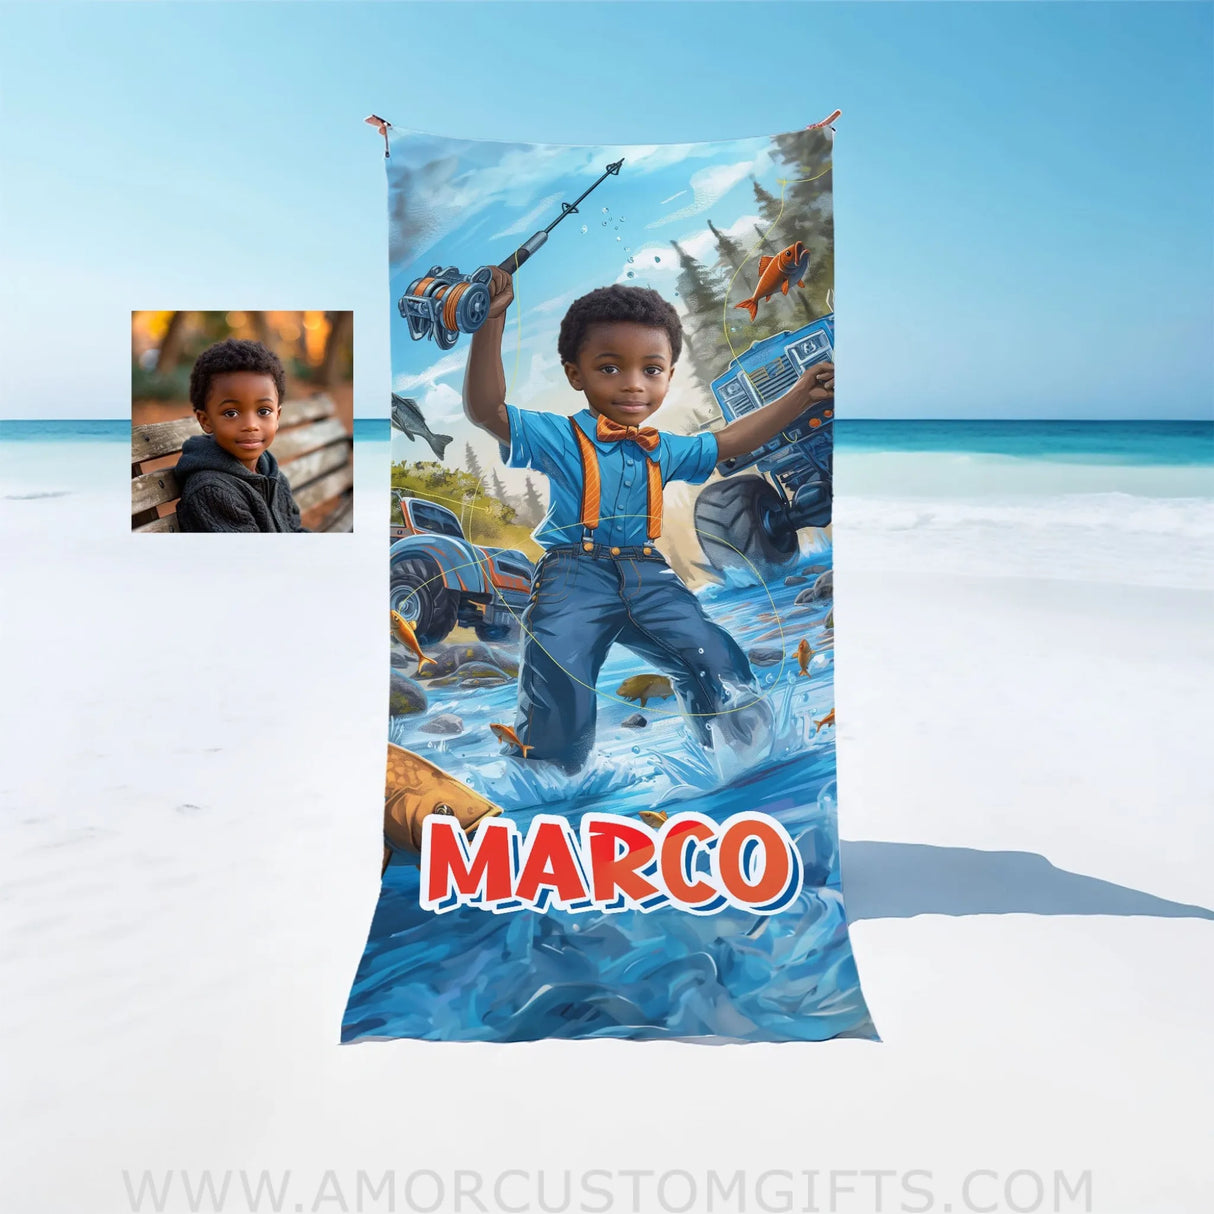 Towels Personalized Blippii Monster Truck Boy Fishing Boy Photo Beach Towel